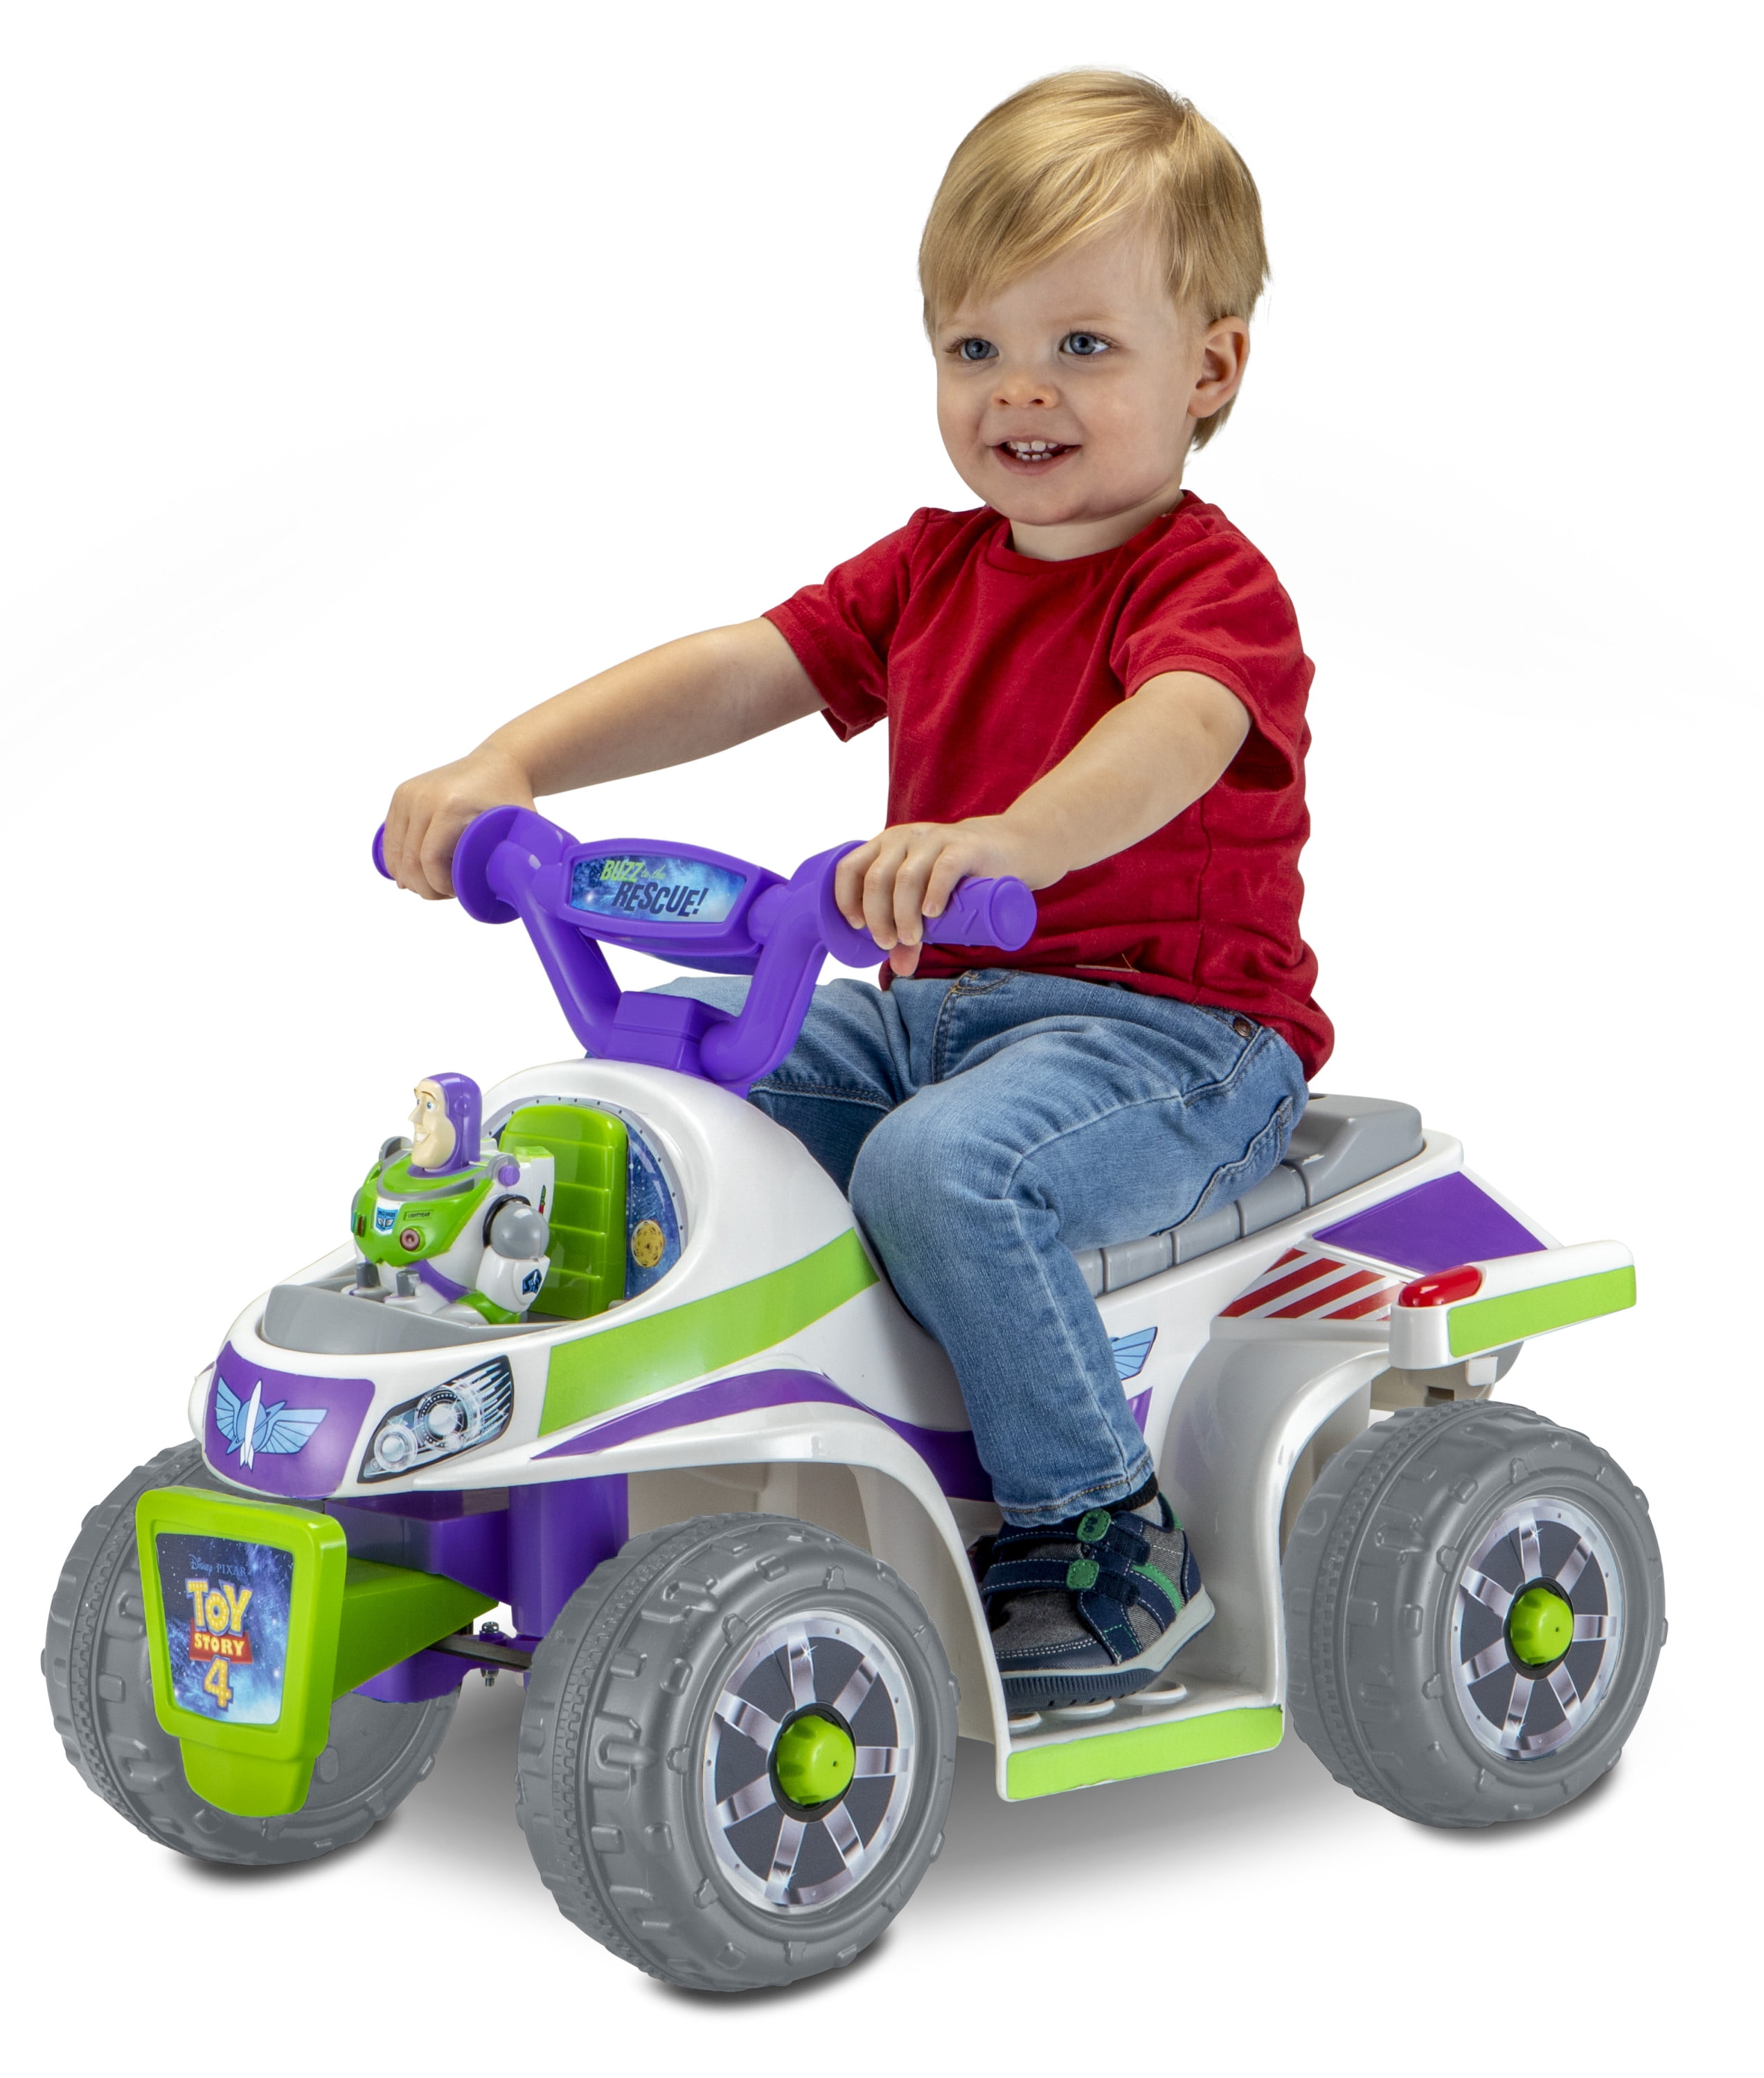 riding toys for toddlers walmart